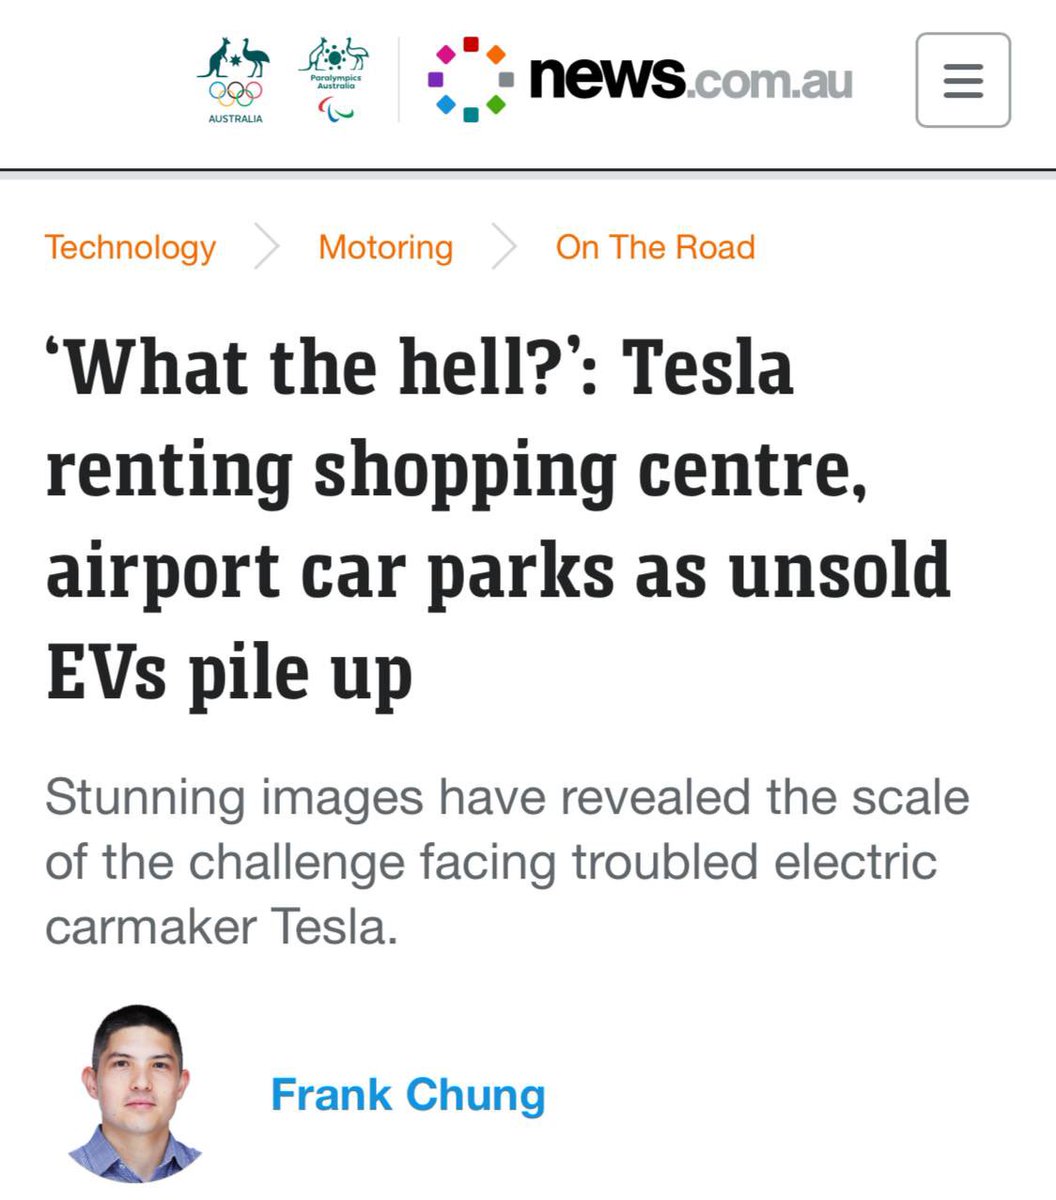 🤓🤷🏻‍♂️🇦🇺 Go woke. “Tesla is renting out shopping centre car parks to store unsold models as the electric carmaker faces flagging consumer demand and growing competition from cheaper Chinese competitors. First-quarter sales figures released by Tesla last month revealed it